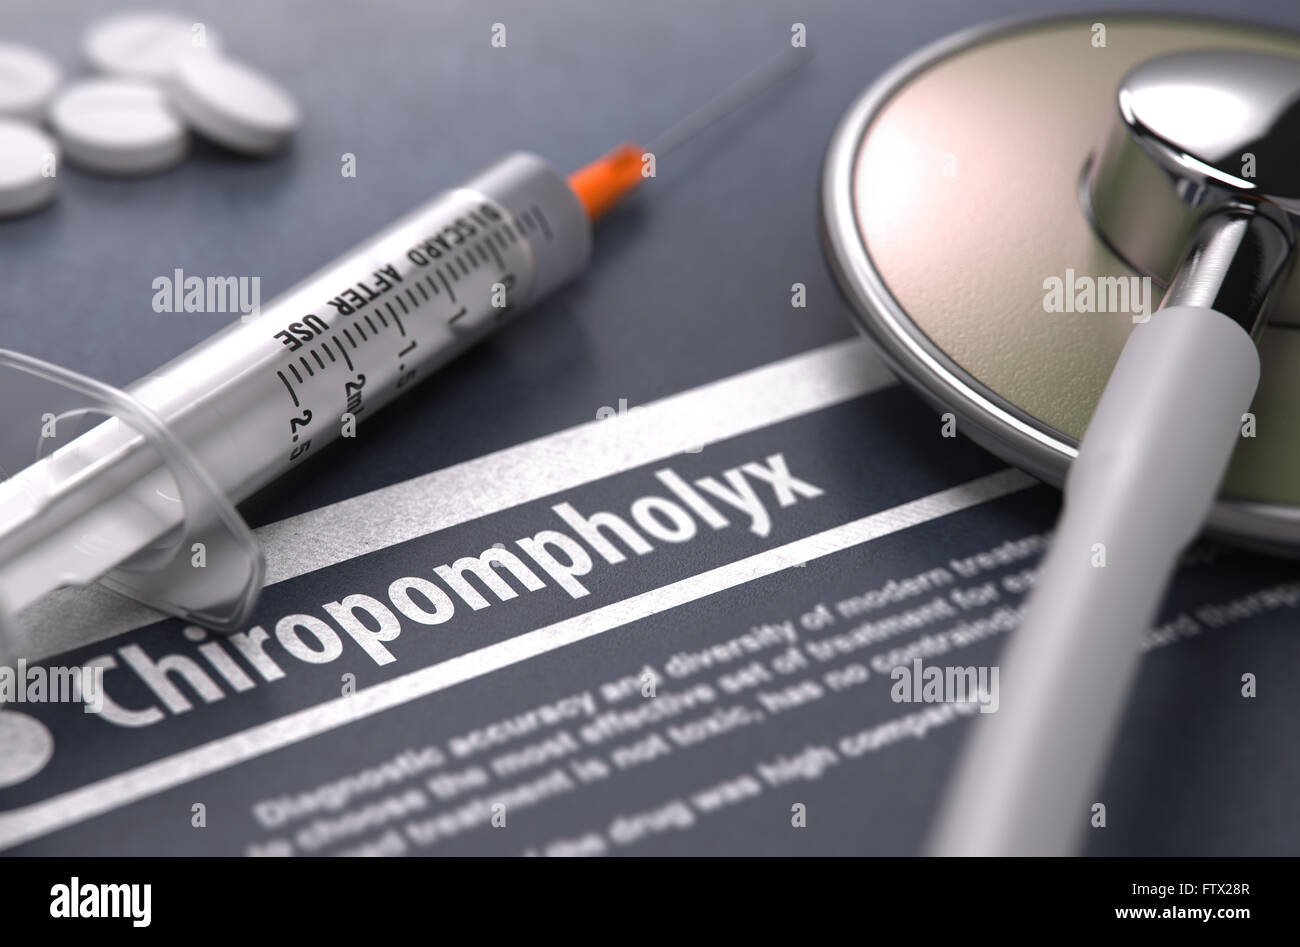 Chiropompholyx - Printed Diagnosis on Grey Background. Stock Photo